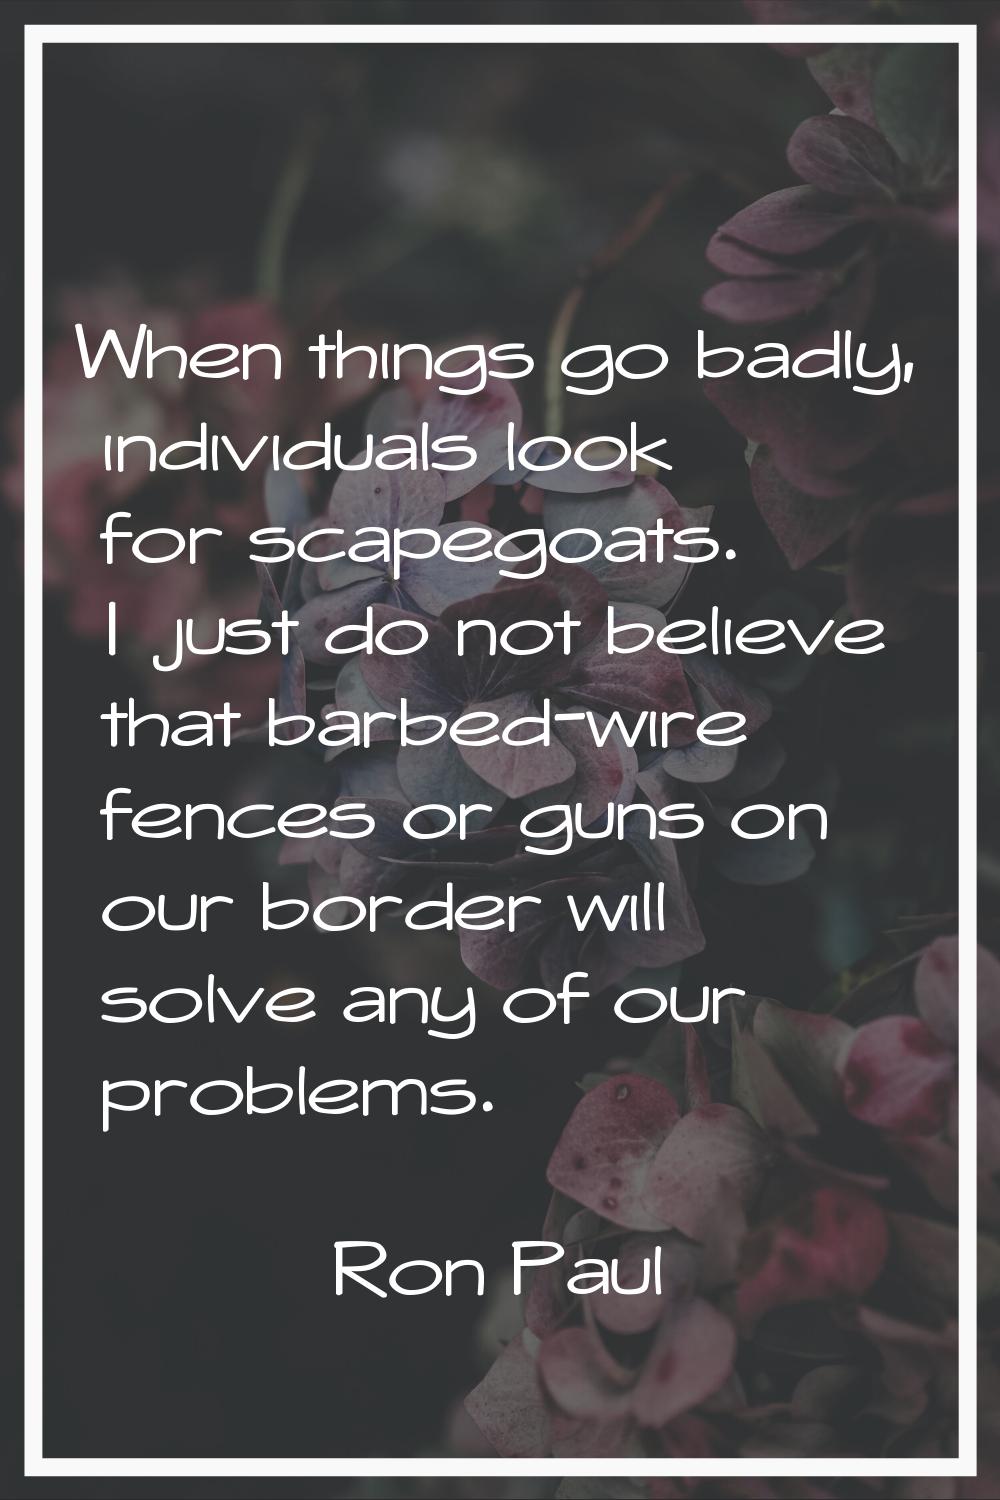 When things go badly, individuals look for scapegoats. I just do not believe that barbed-wire fence